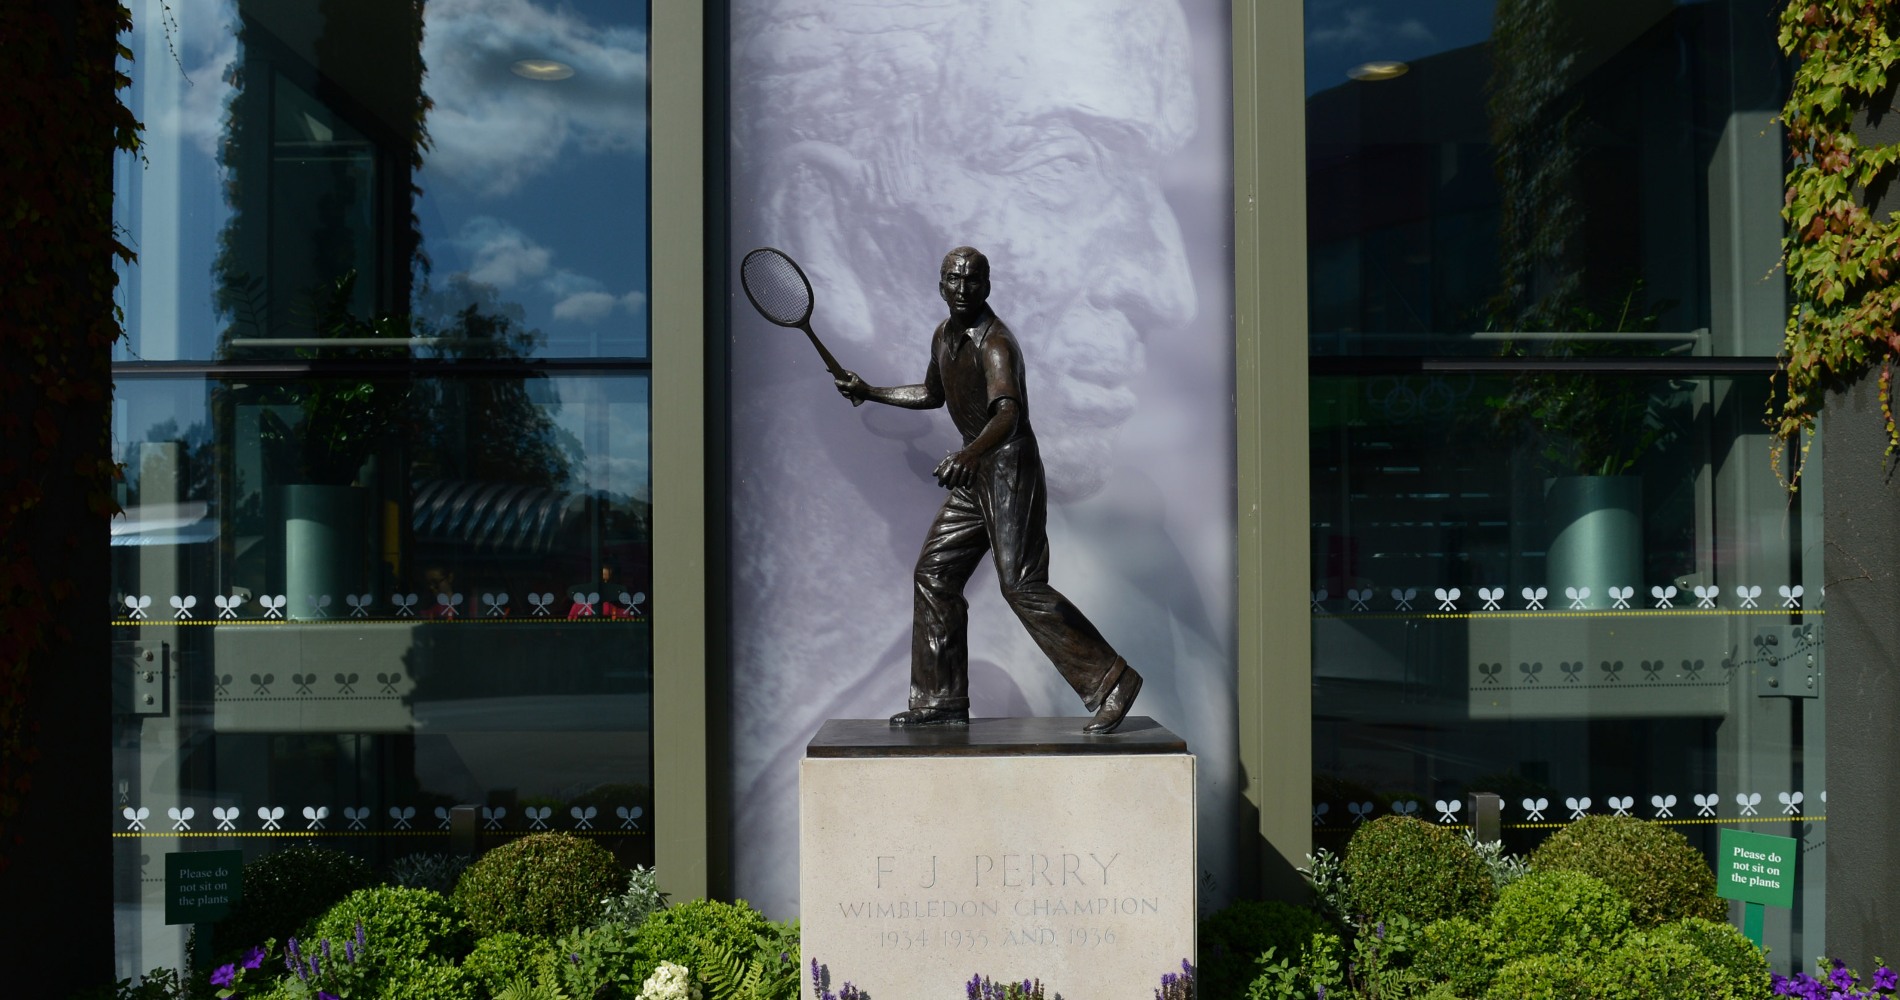 Fred Perry has a statue at Wimbledon